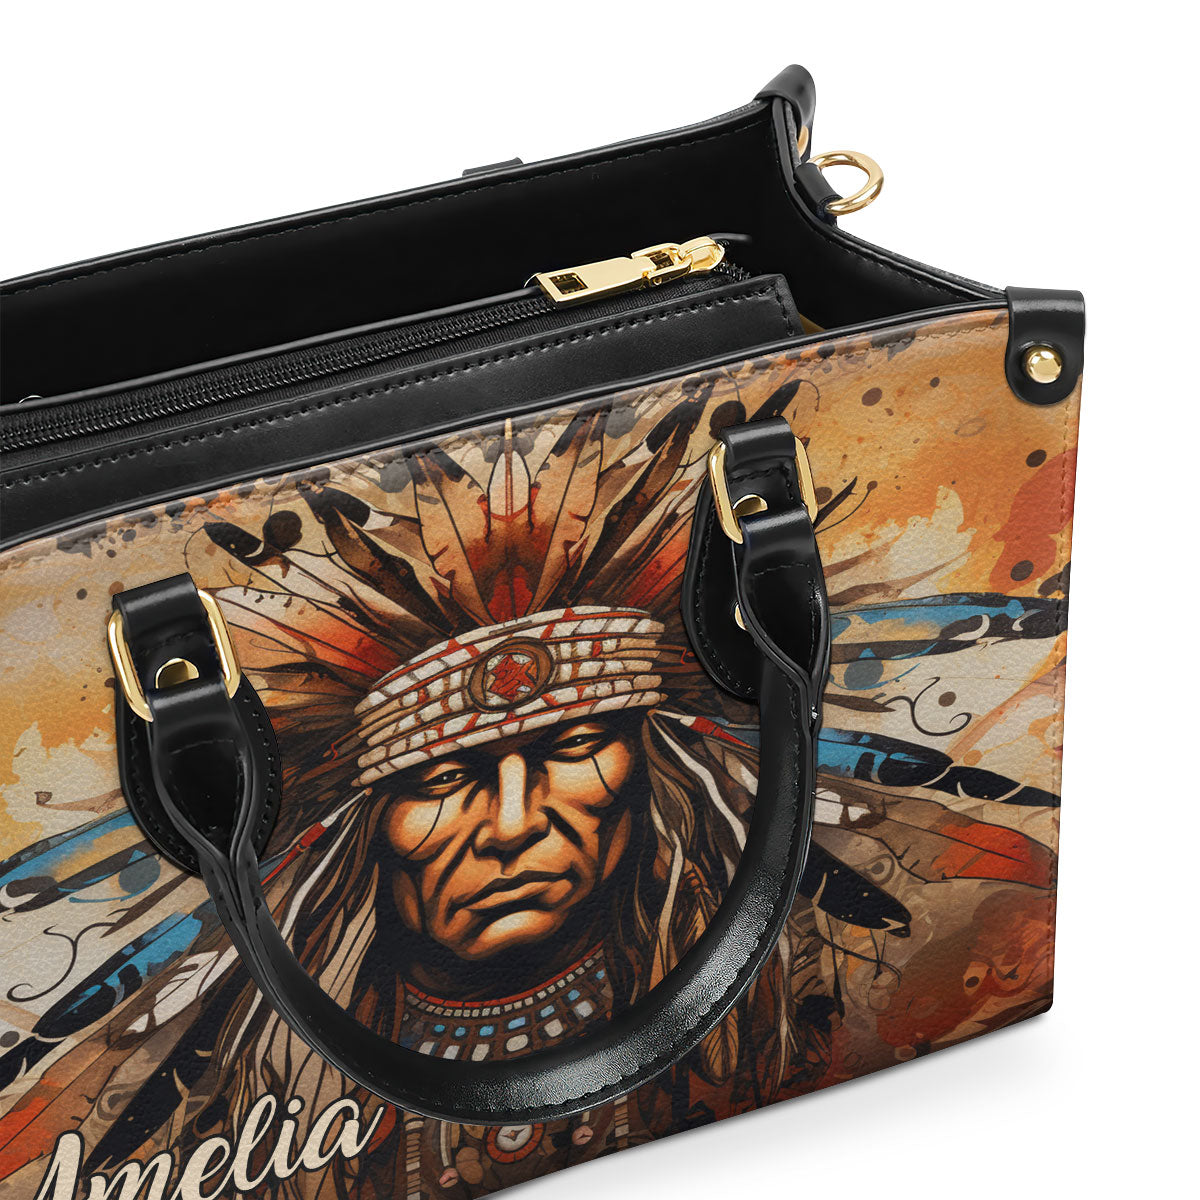 Native American Culture - Personalized Leather Handbag MS121